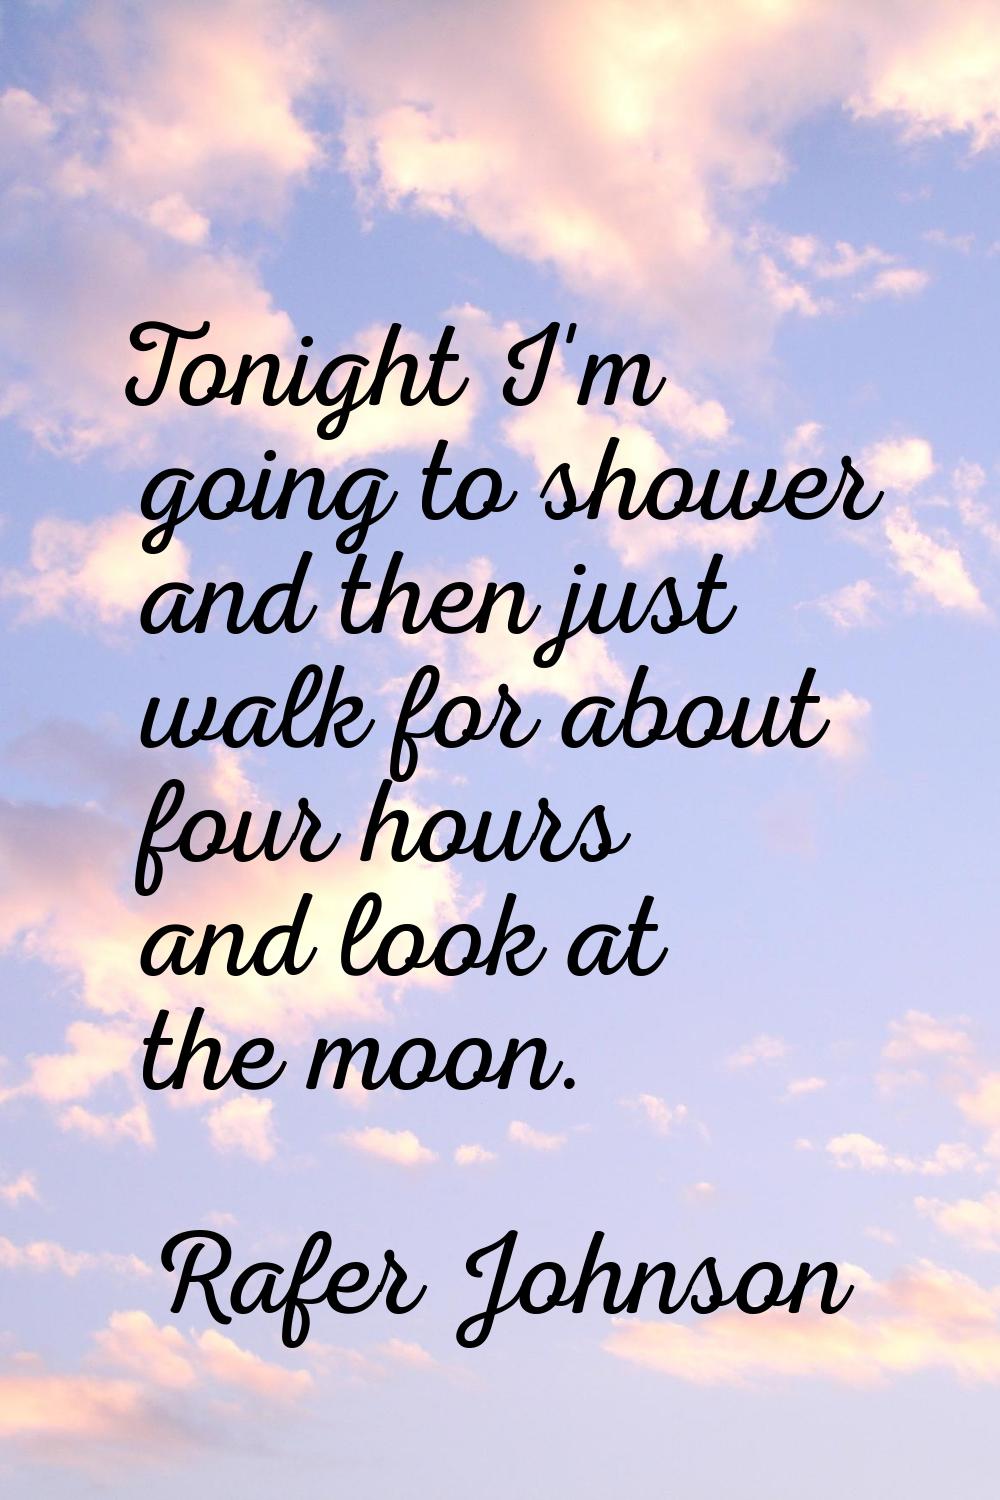 Tonight I'm going to shower and then just walk for about four hours and look at the moon.